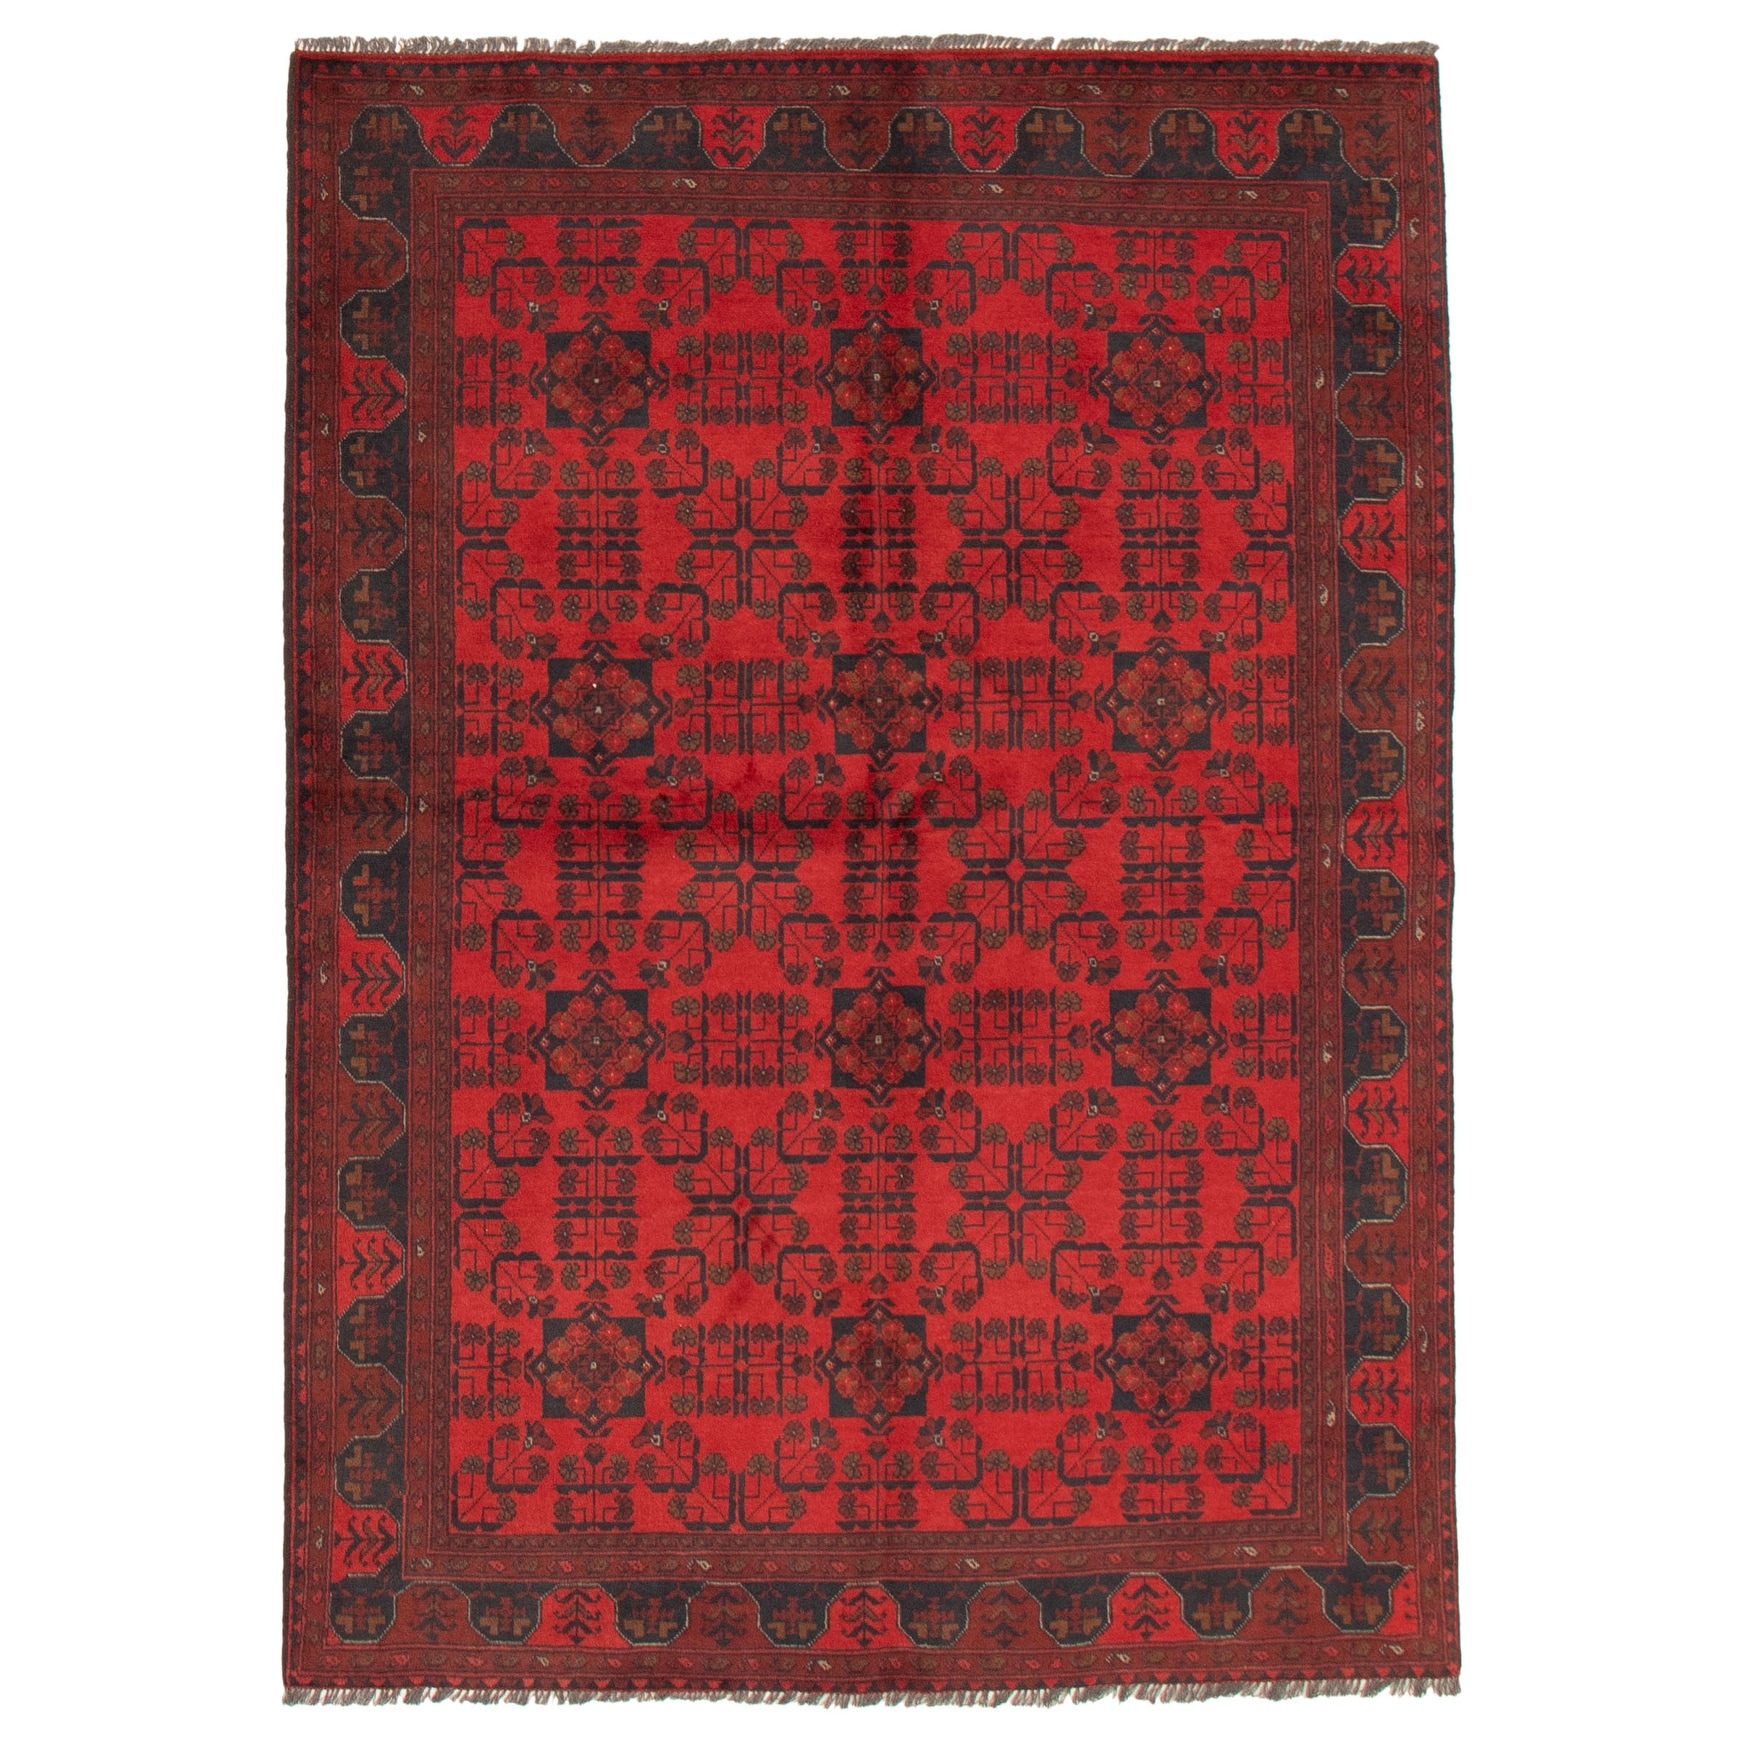 Bedroom Finest Khal Mohammadi Bordered Red Rug 5'8 x 7'9 355610 Hand-Knotted Wool Rug eCarpet Gallery Area Rug for Living Room 